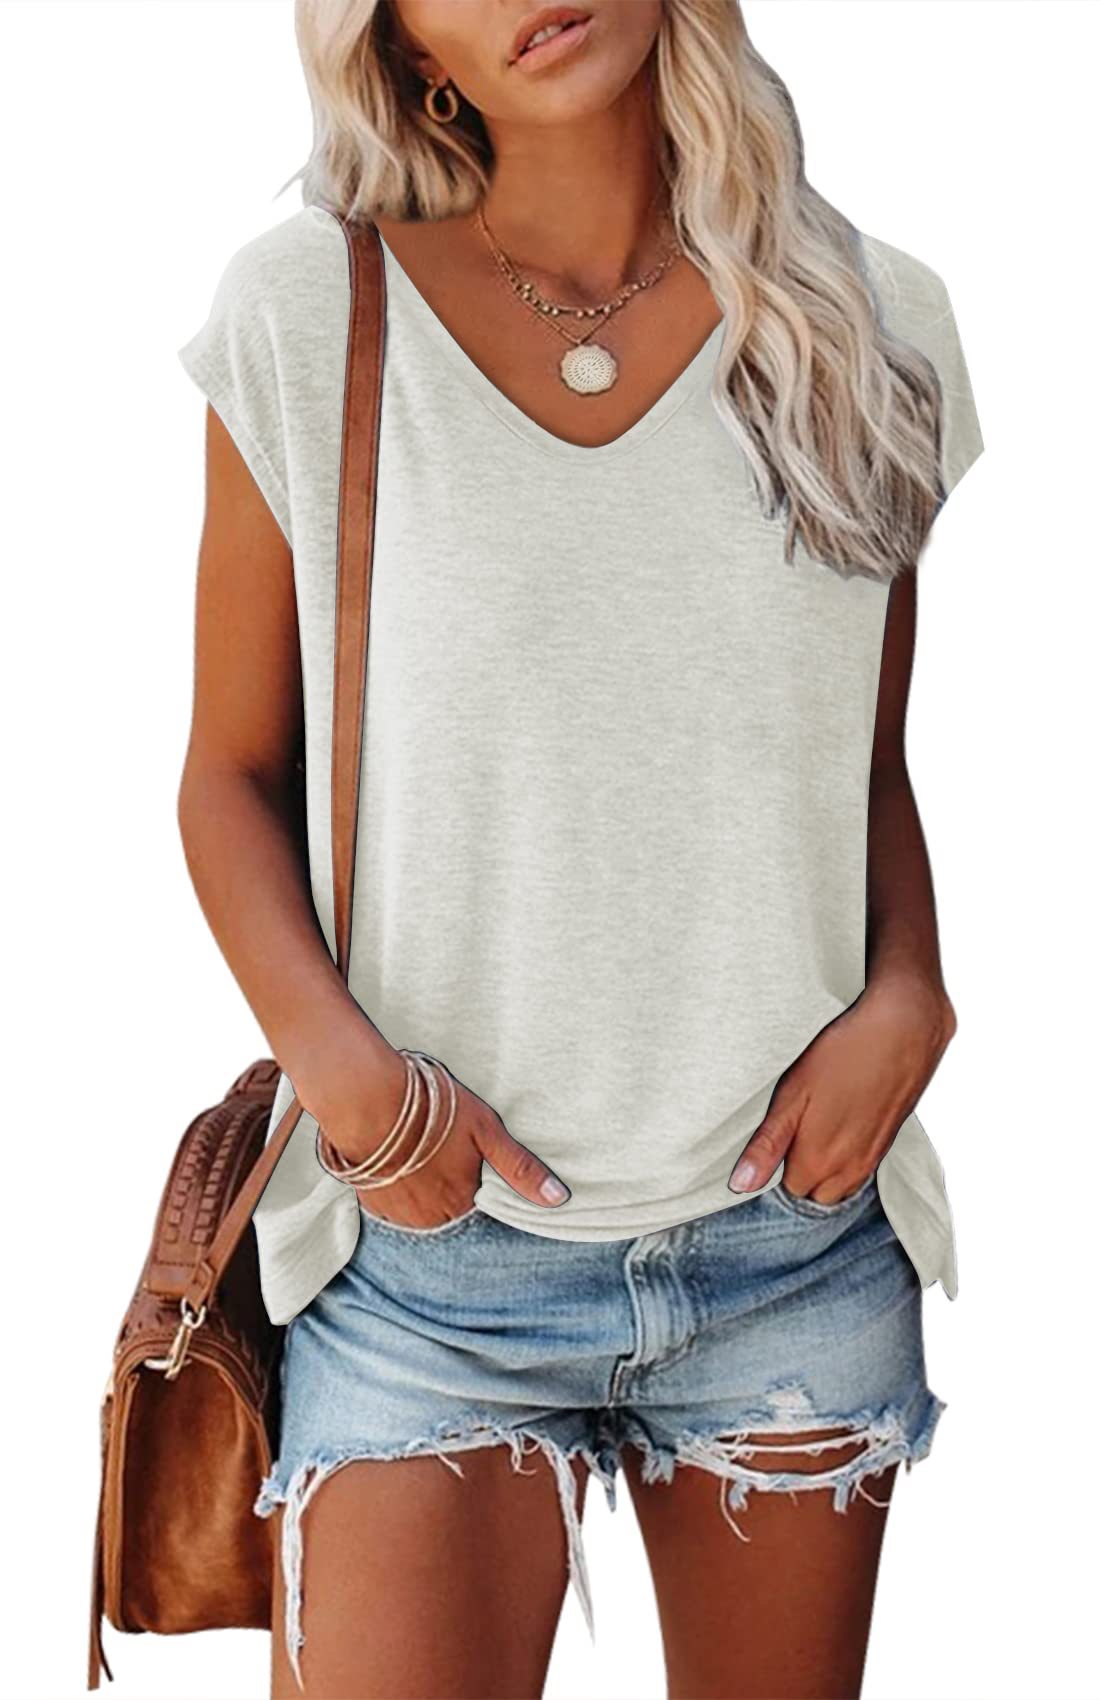 Solid Color V-neck Cotton Blend Casual Loose Sleeveless Top Women's T-shirt